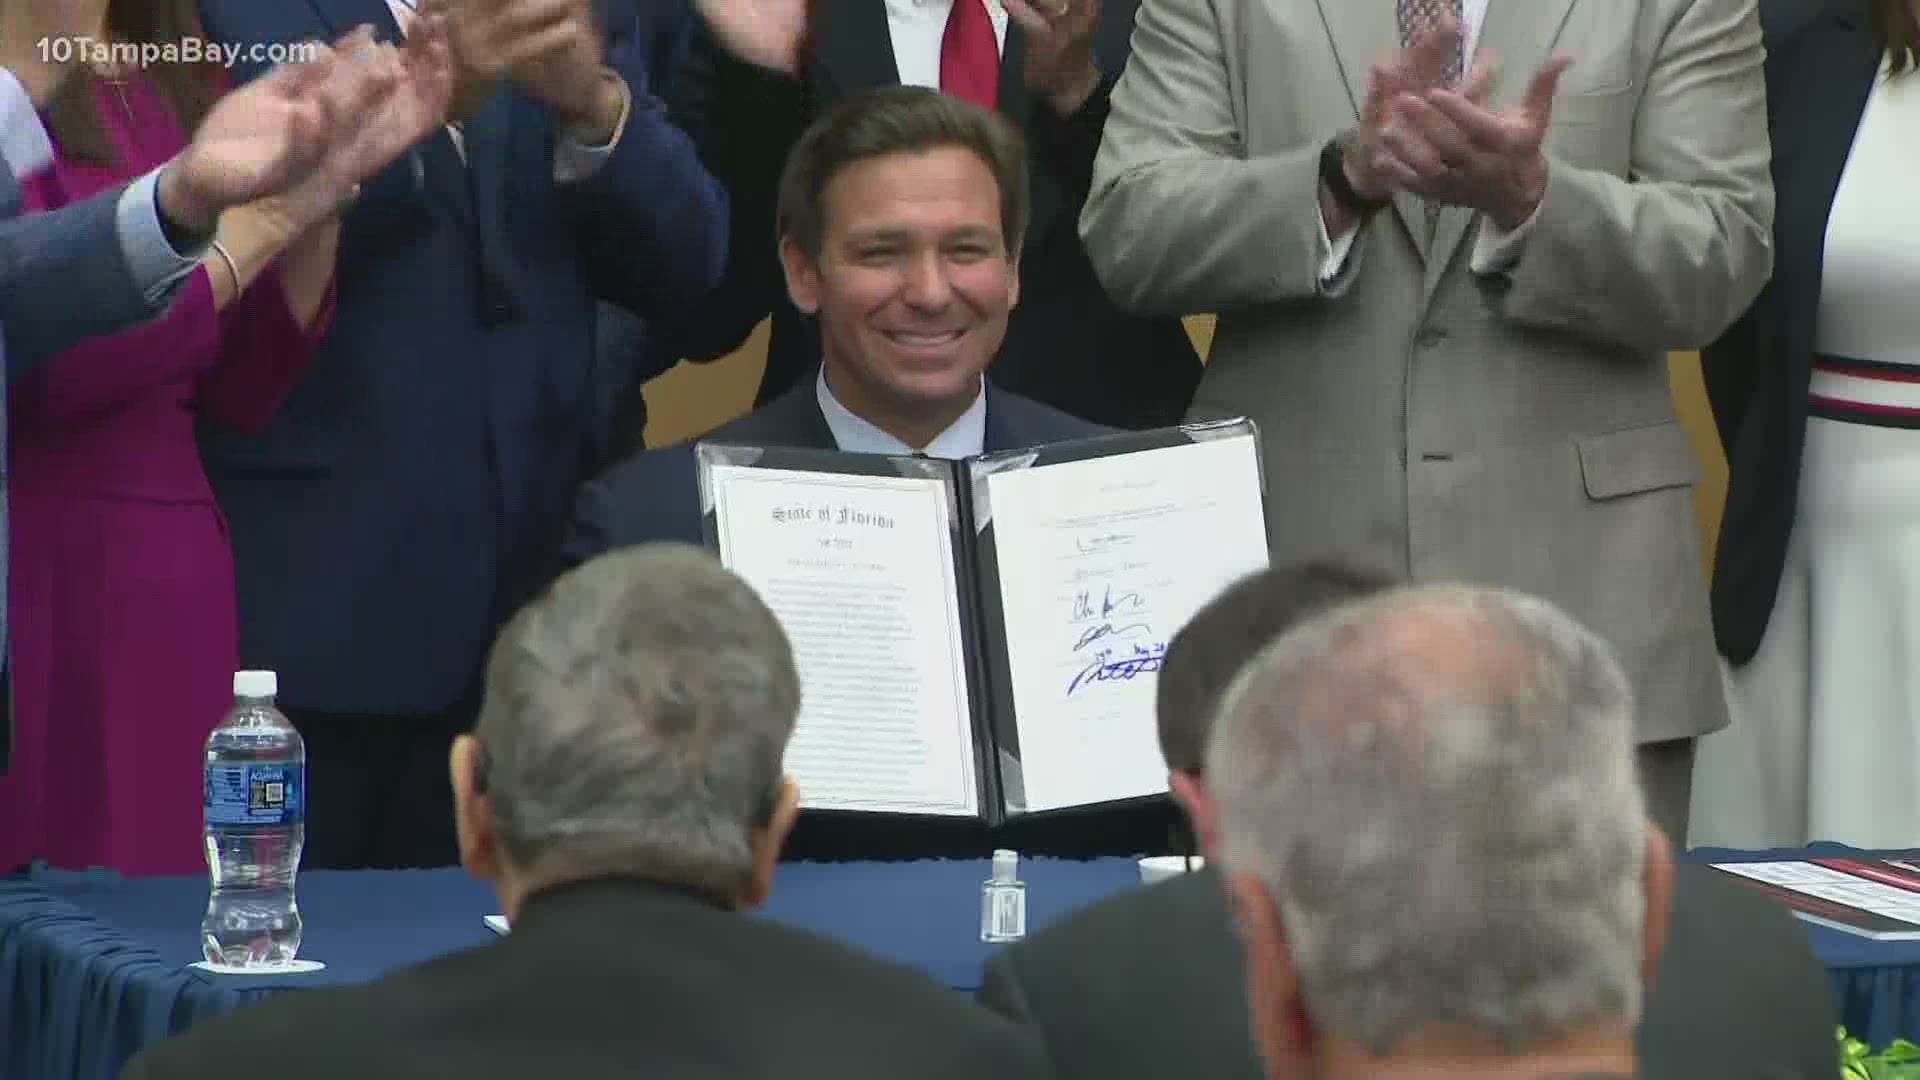 Gov. DeSantis had made this piece of legislation a top priority since early February.